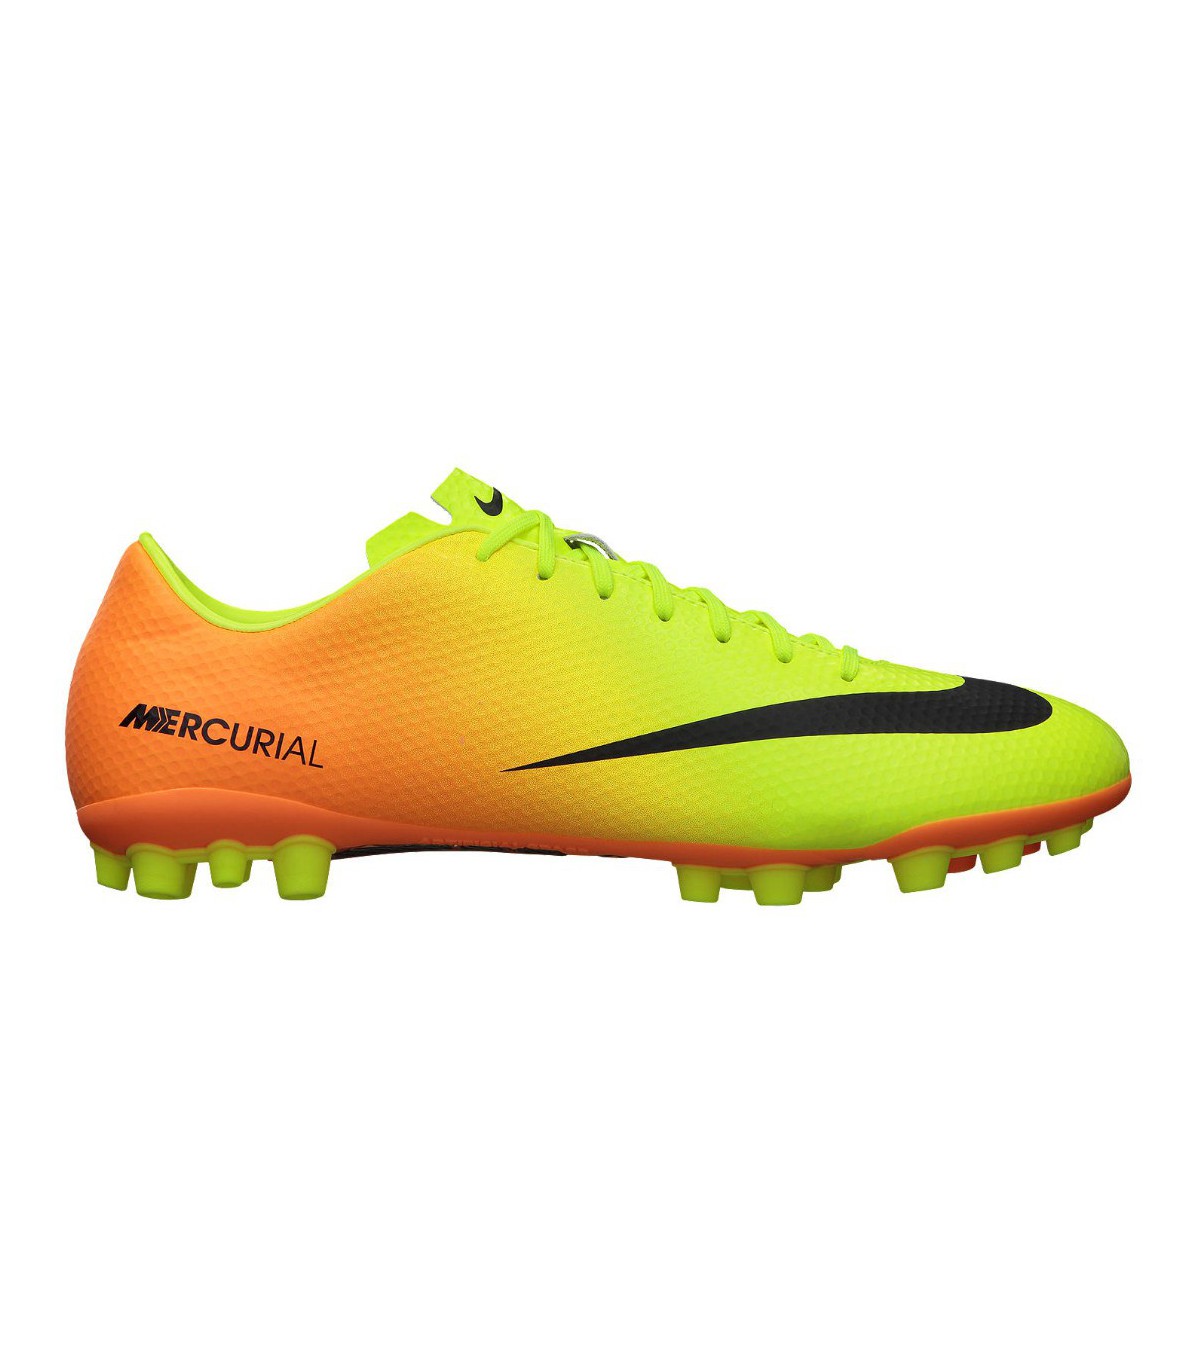 enchufe puede Disponible NIKE MERCURIAL VELOCE AG AMARILLO